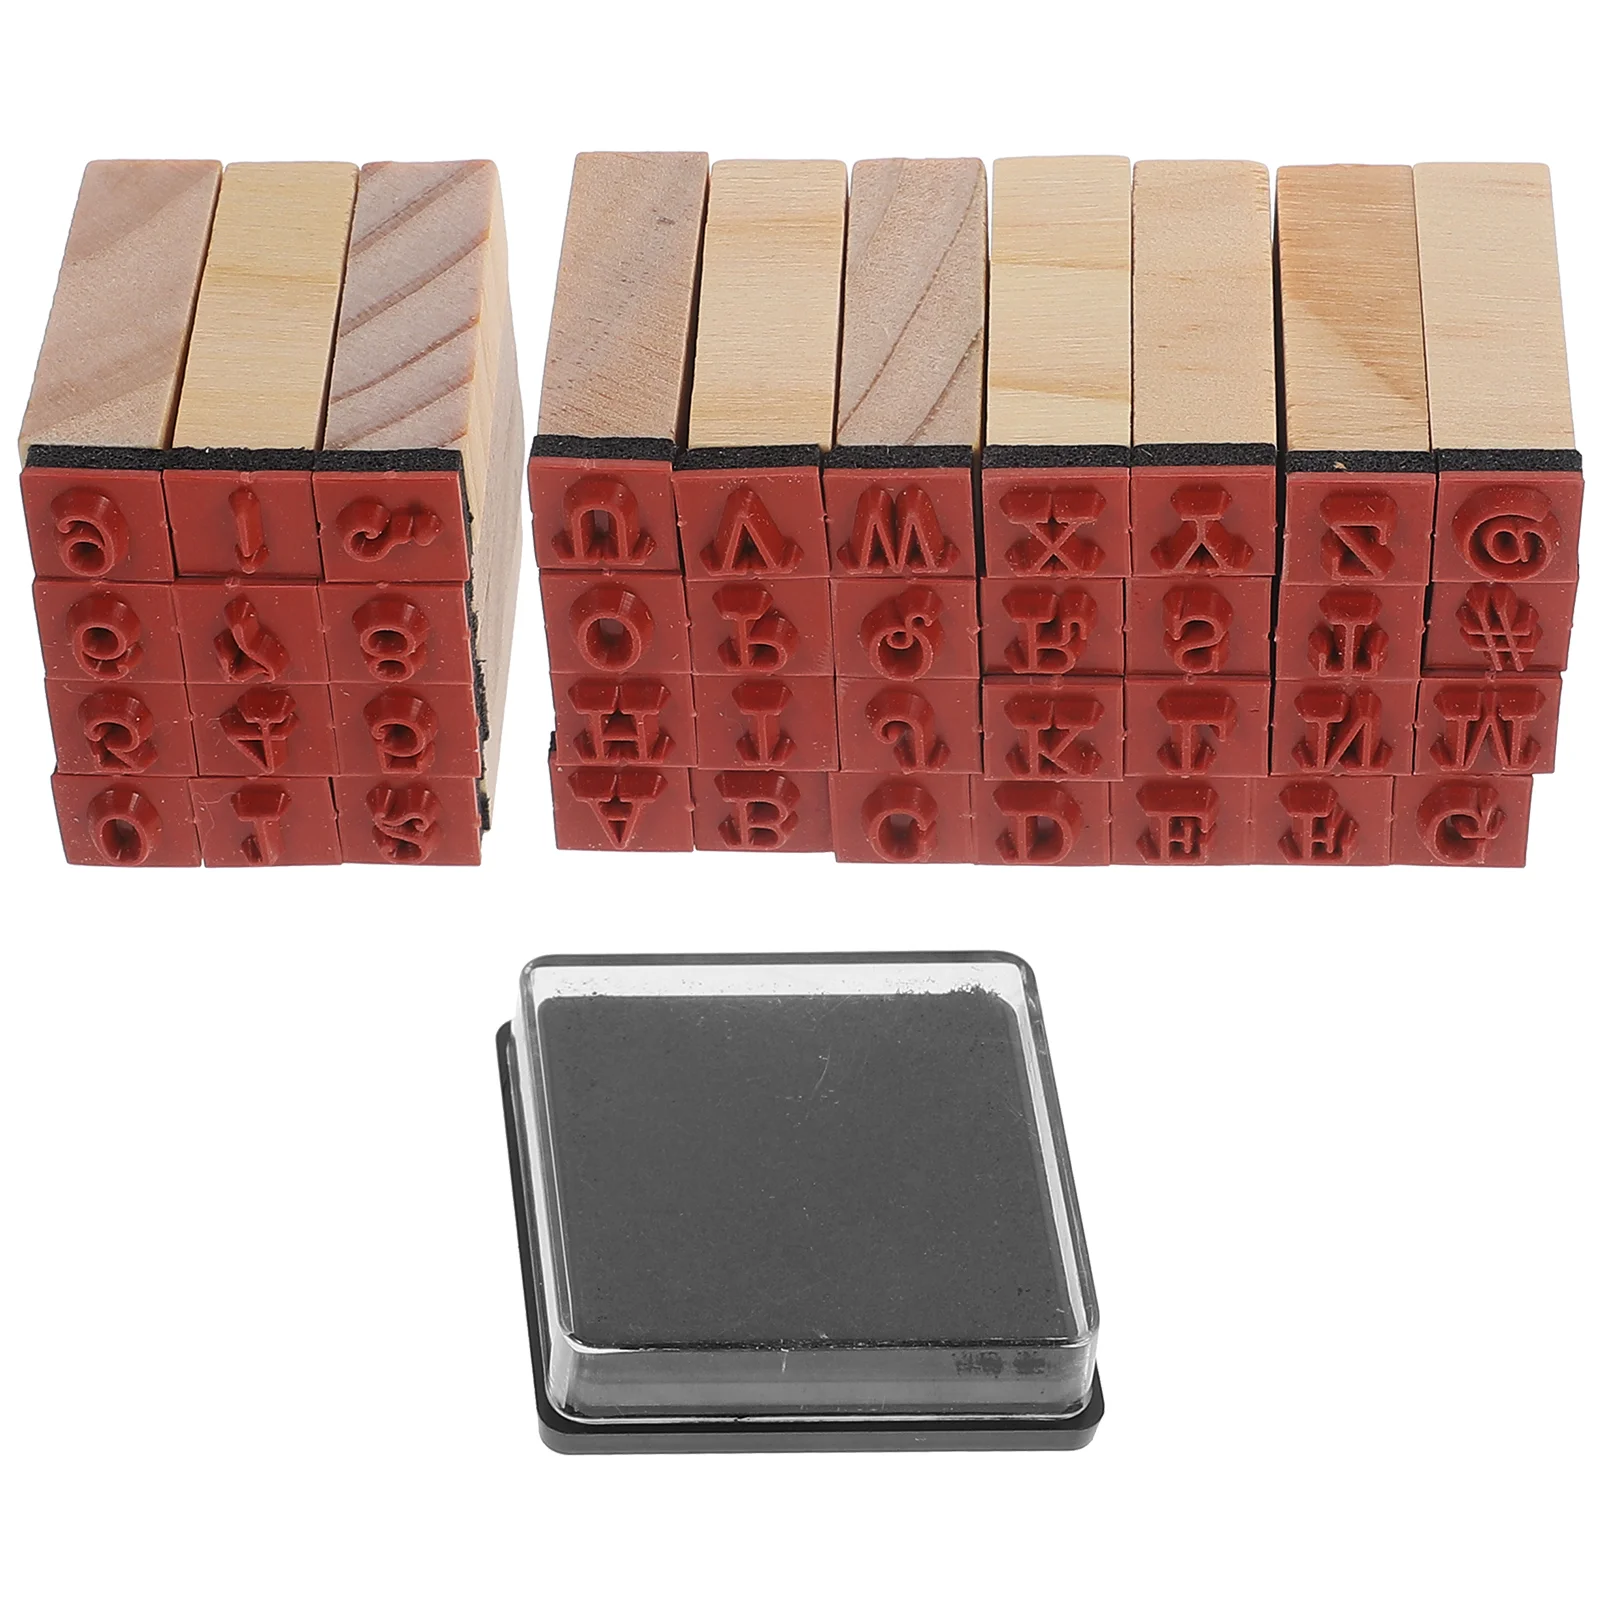 

40 Pcs Alphanumeric Stamp Wood Stamps for Crafting Small Wooden Mini Alphabet Letters Crafts